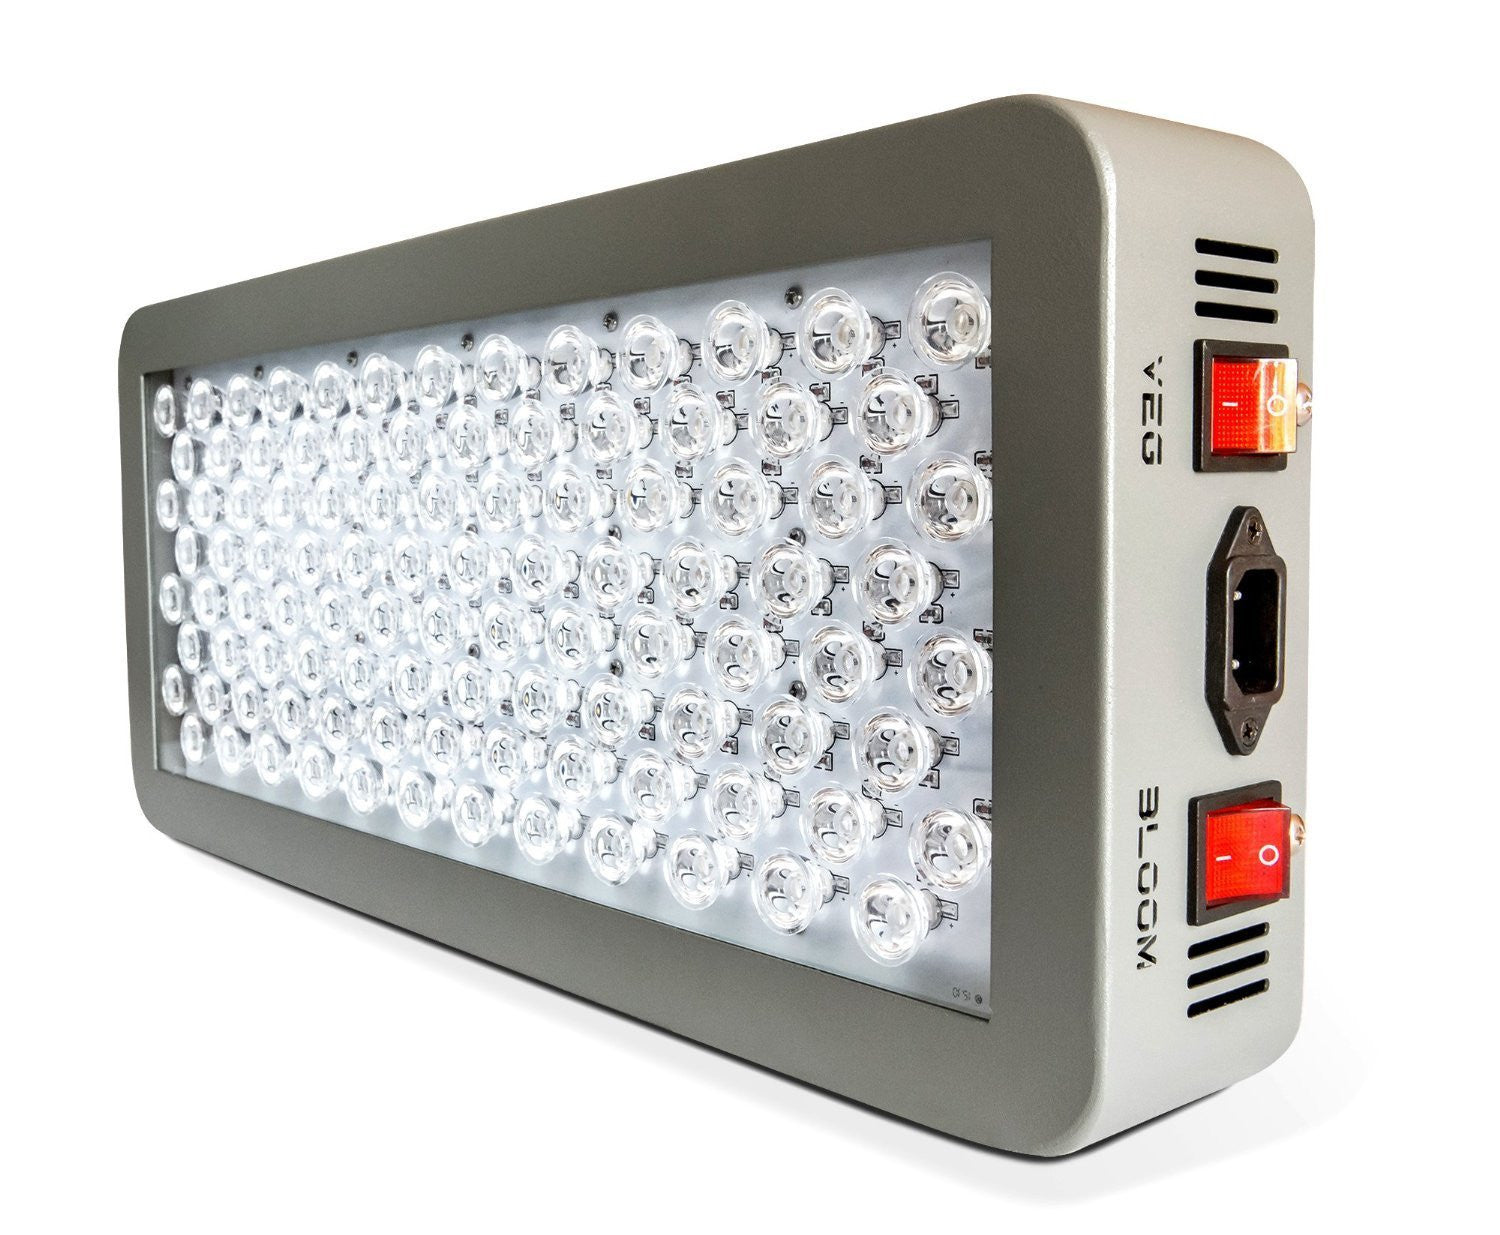 Best 7 LED Grow Lights on Amazon for under $369